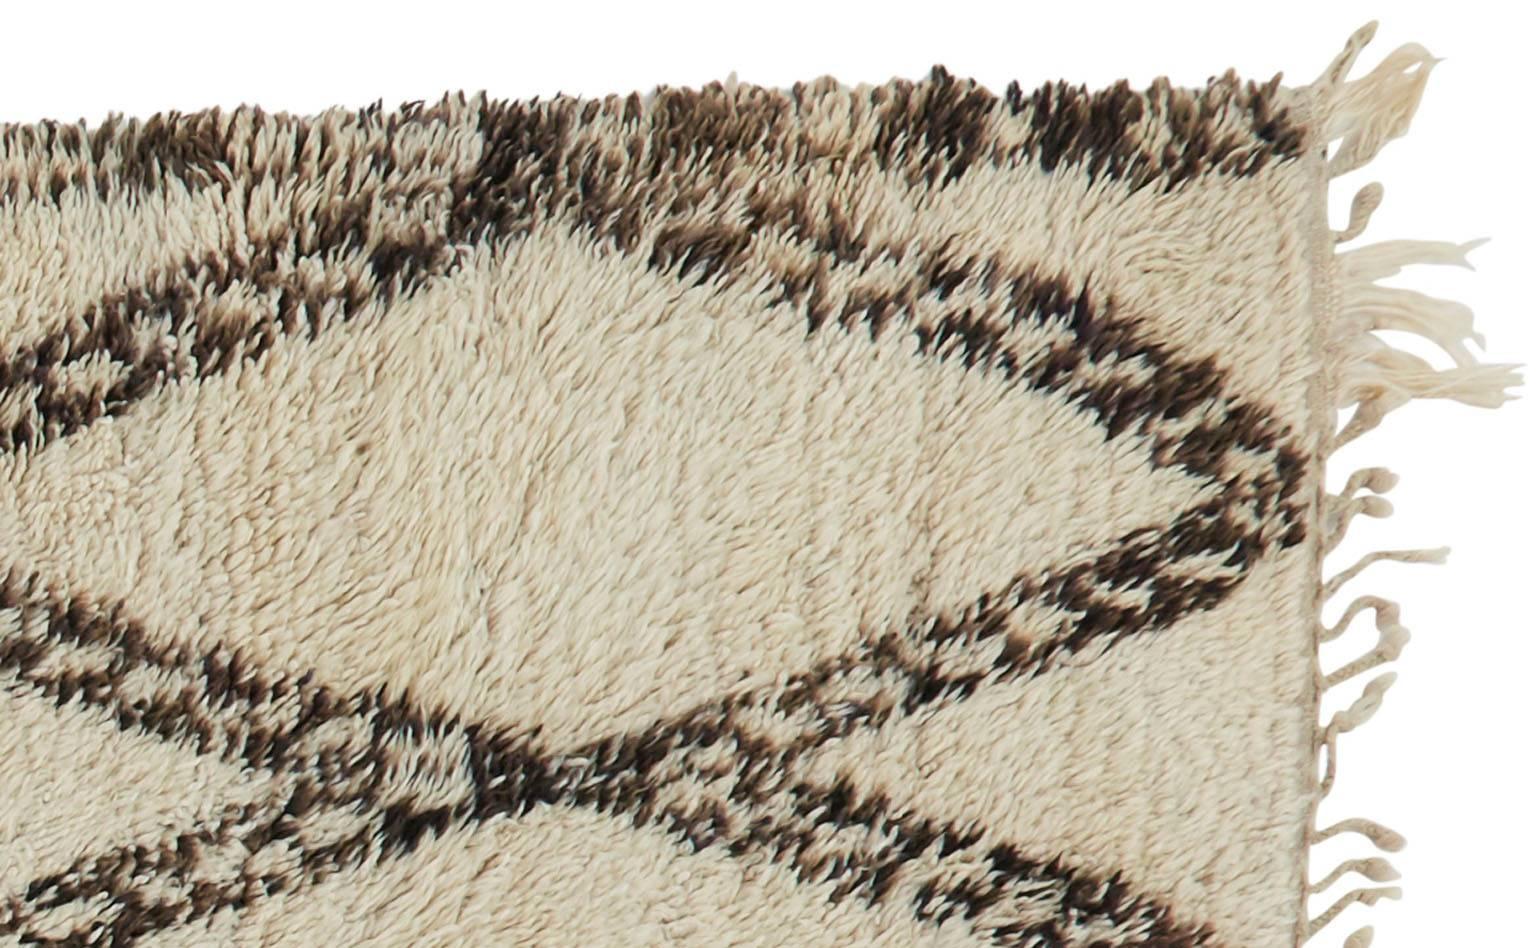 High pile sheeps' wool.
Decorated with brown, grey or black natural dyes in abstract, geometric.
Made by Berber tribes in the atlas mountain region of Morocco.
Measures: 6'3 x 11'3